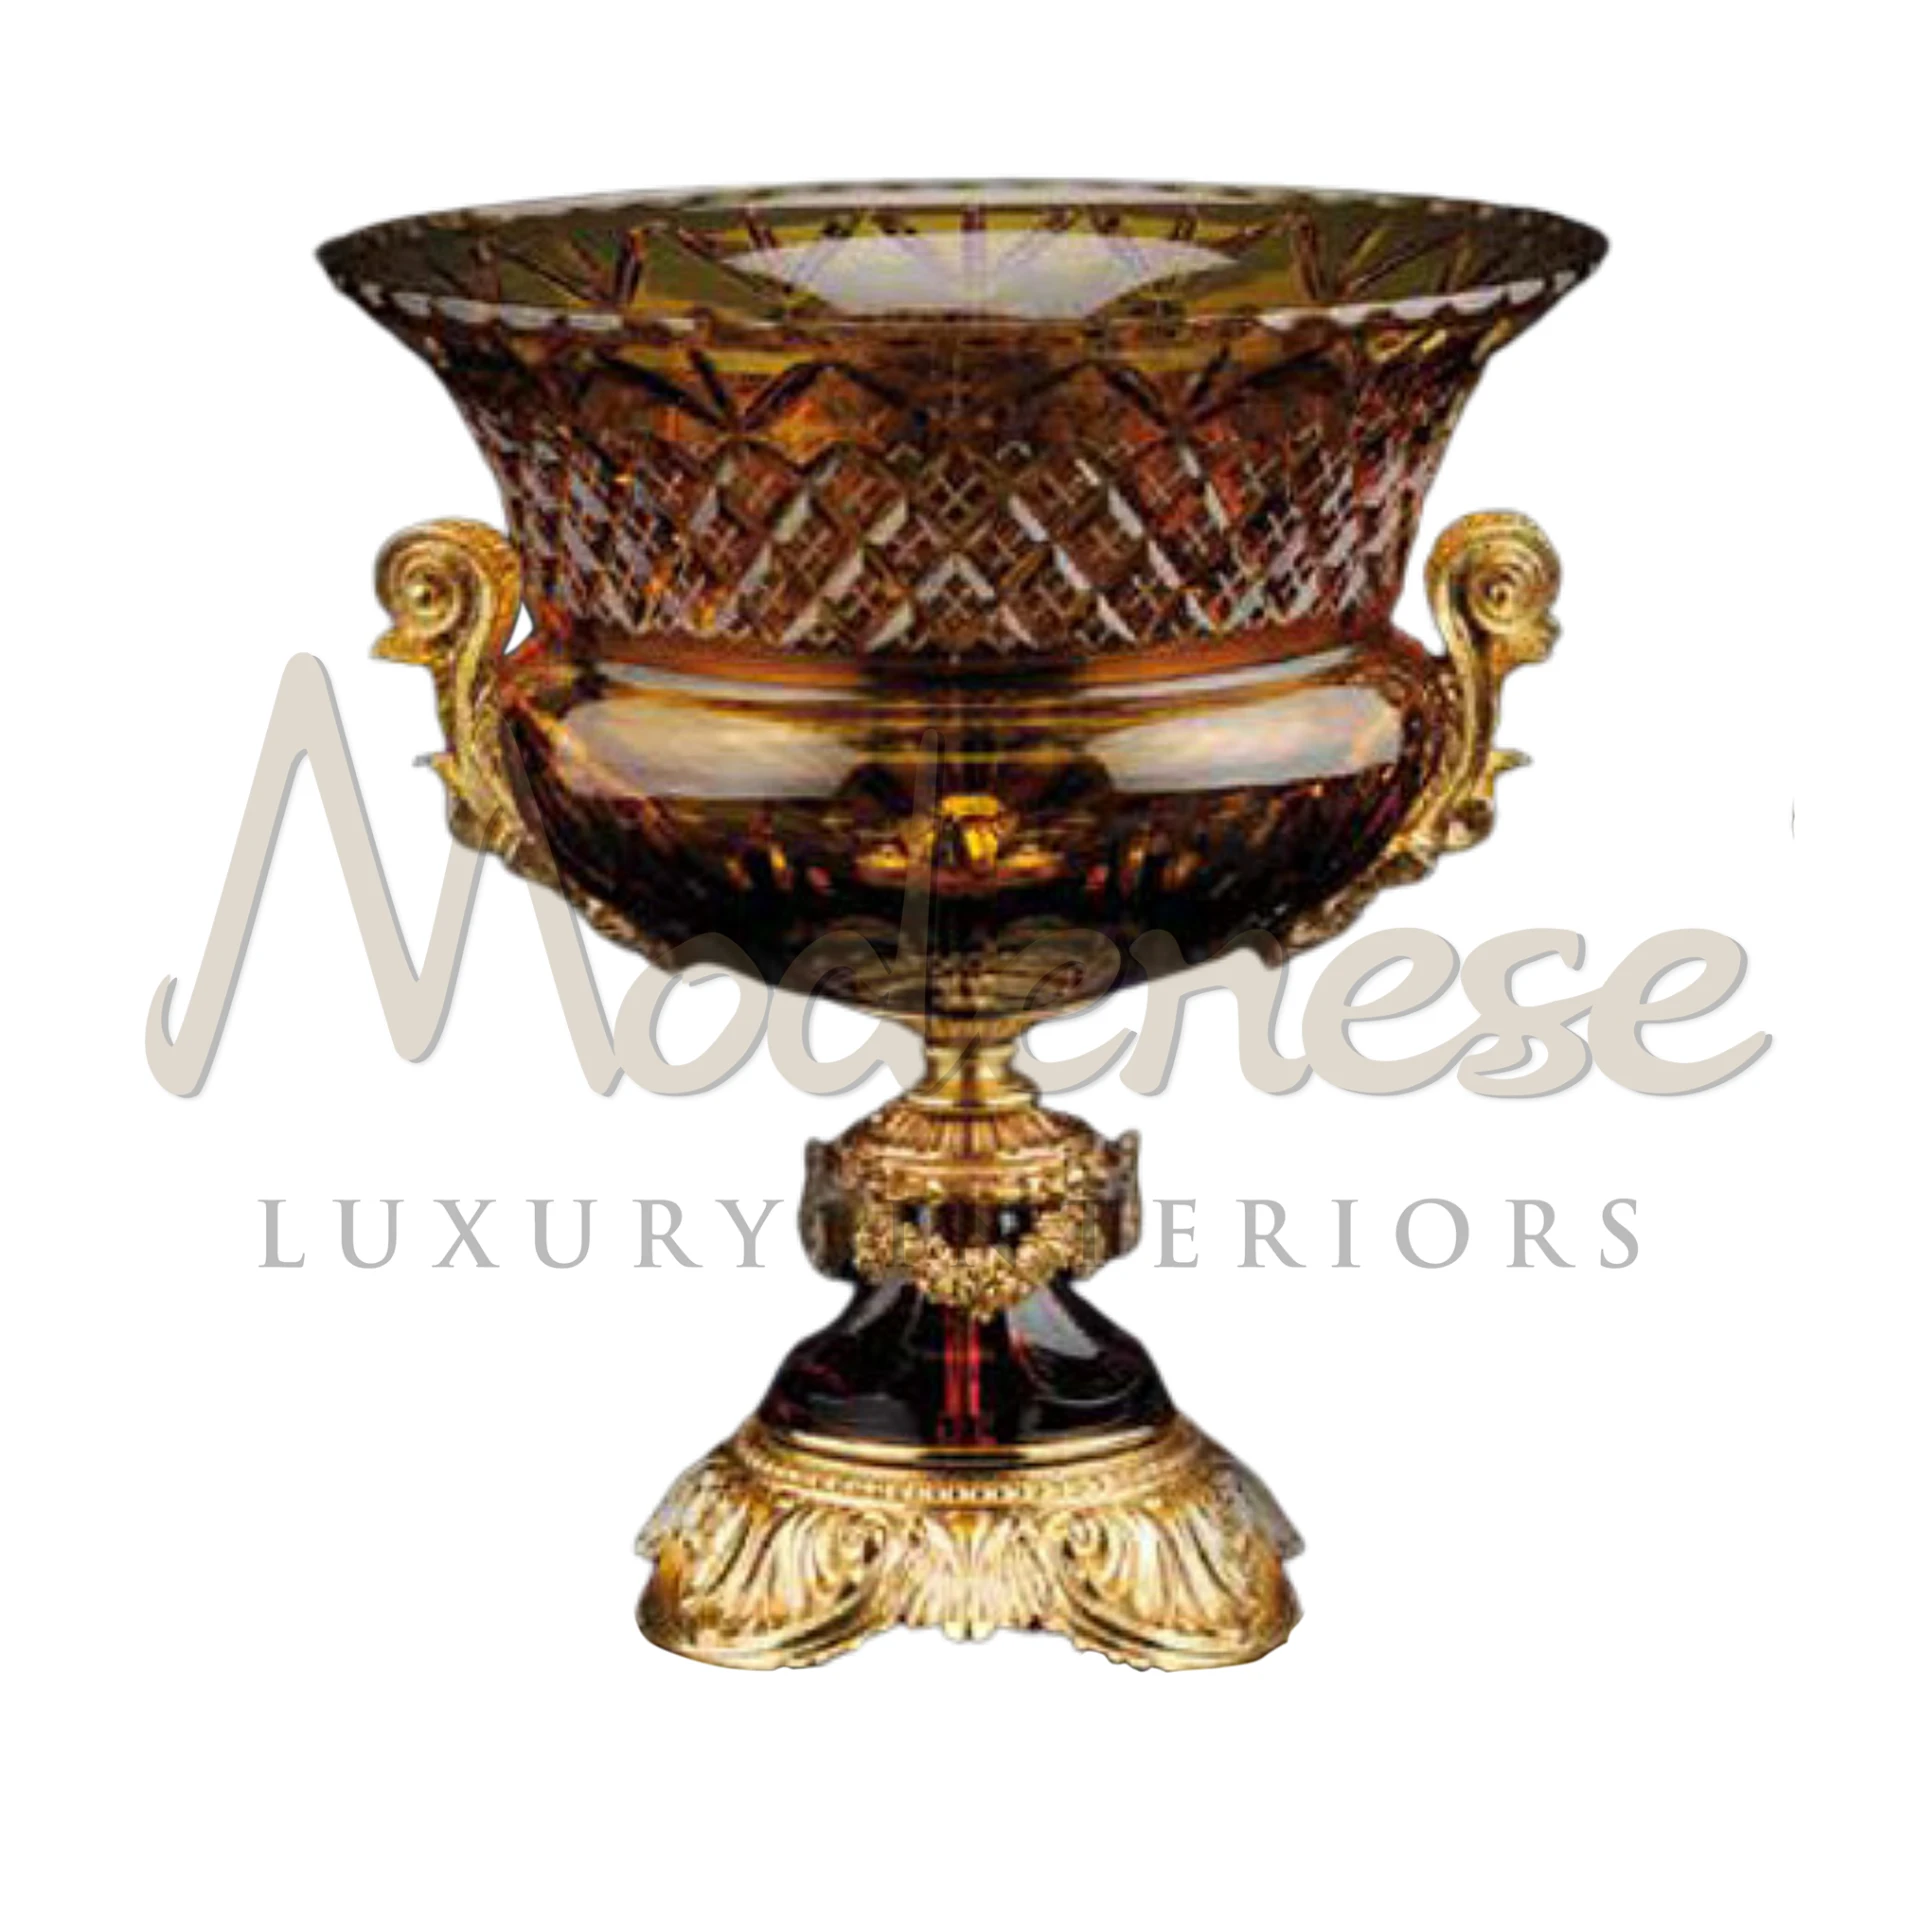 Italian glass vase showcasing exquisite craftsmanship and design, a symbol of luxury and tradition for classic and baroque interiors.






